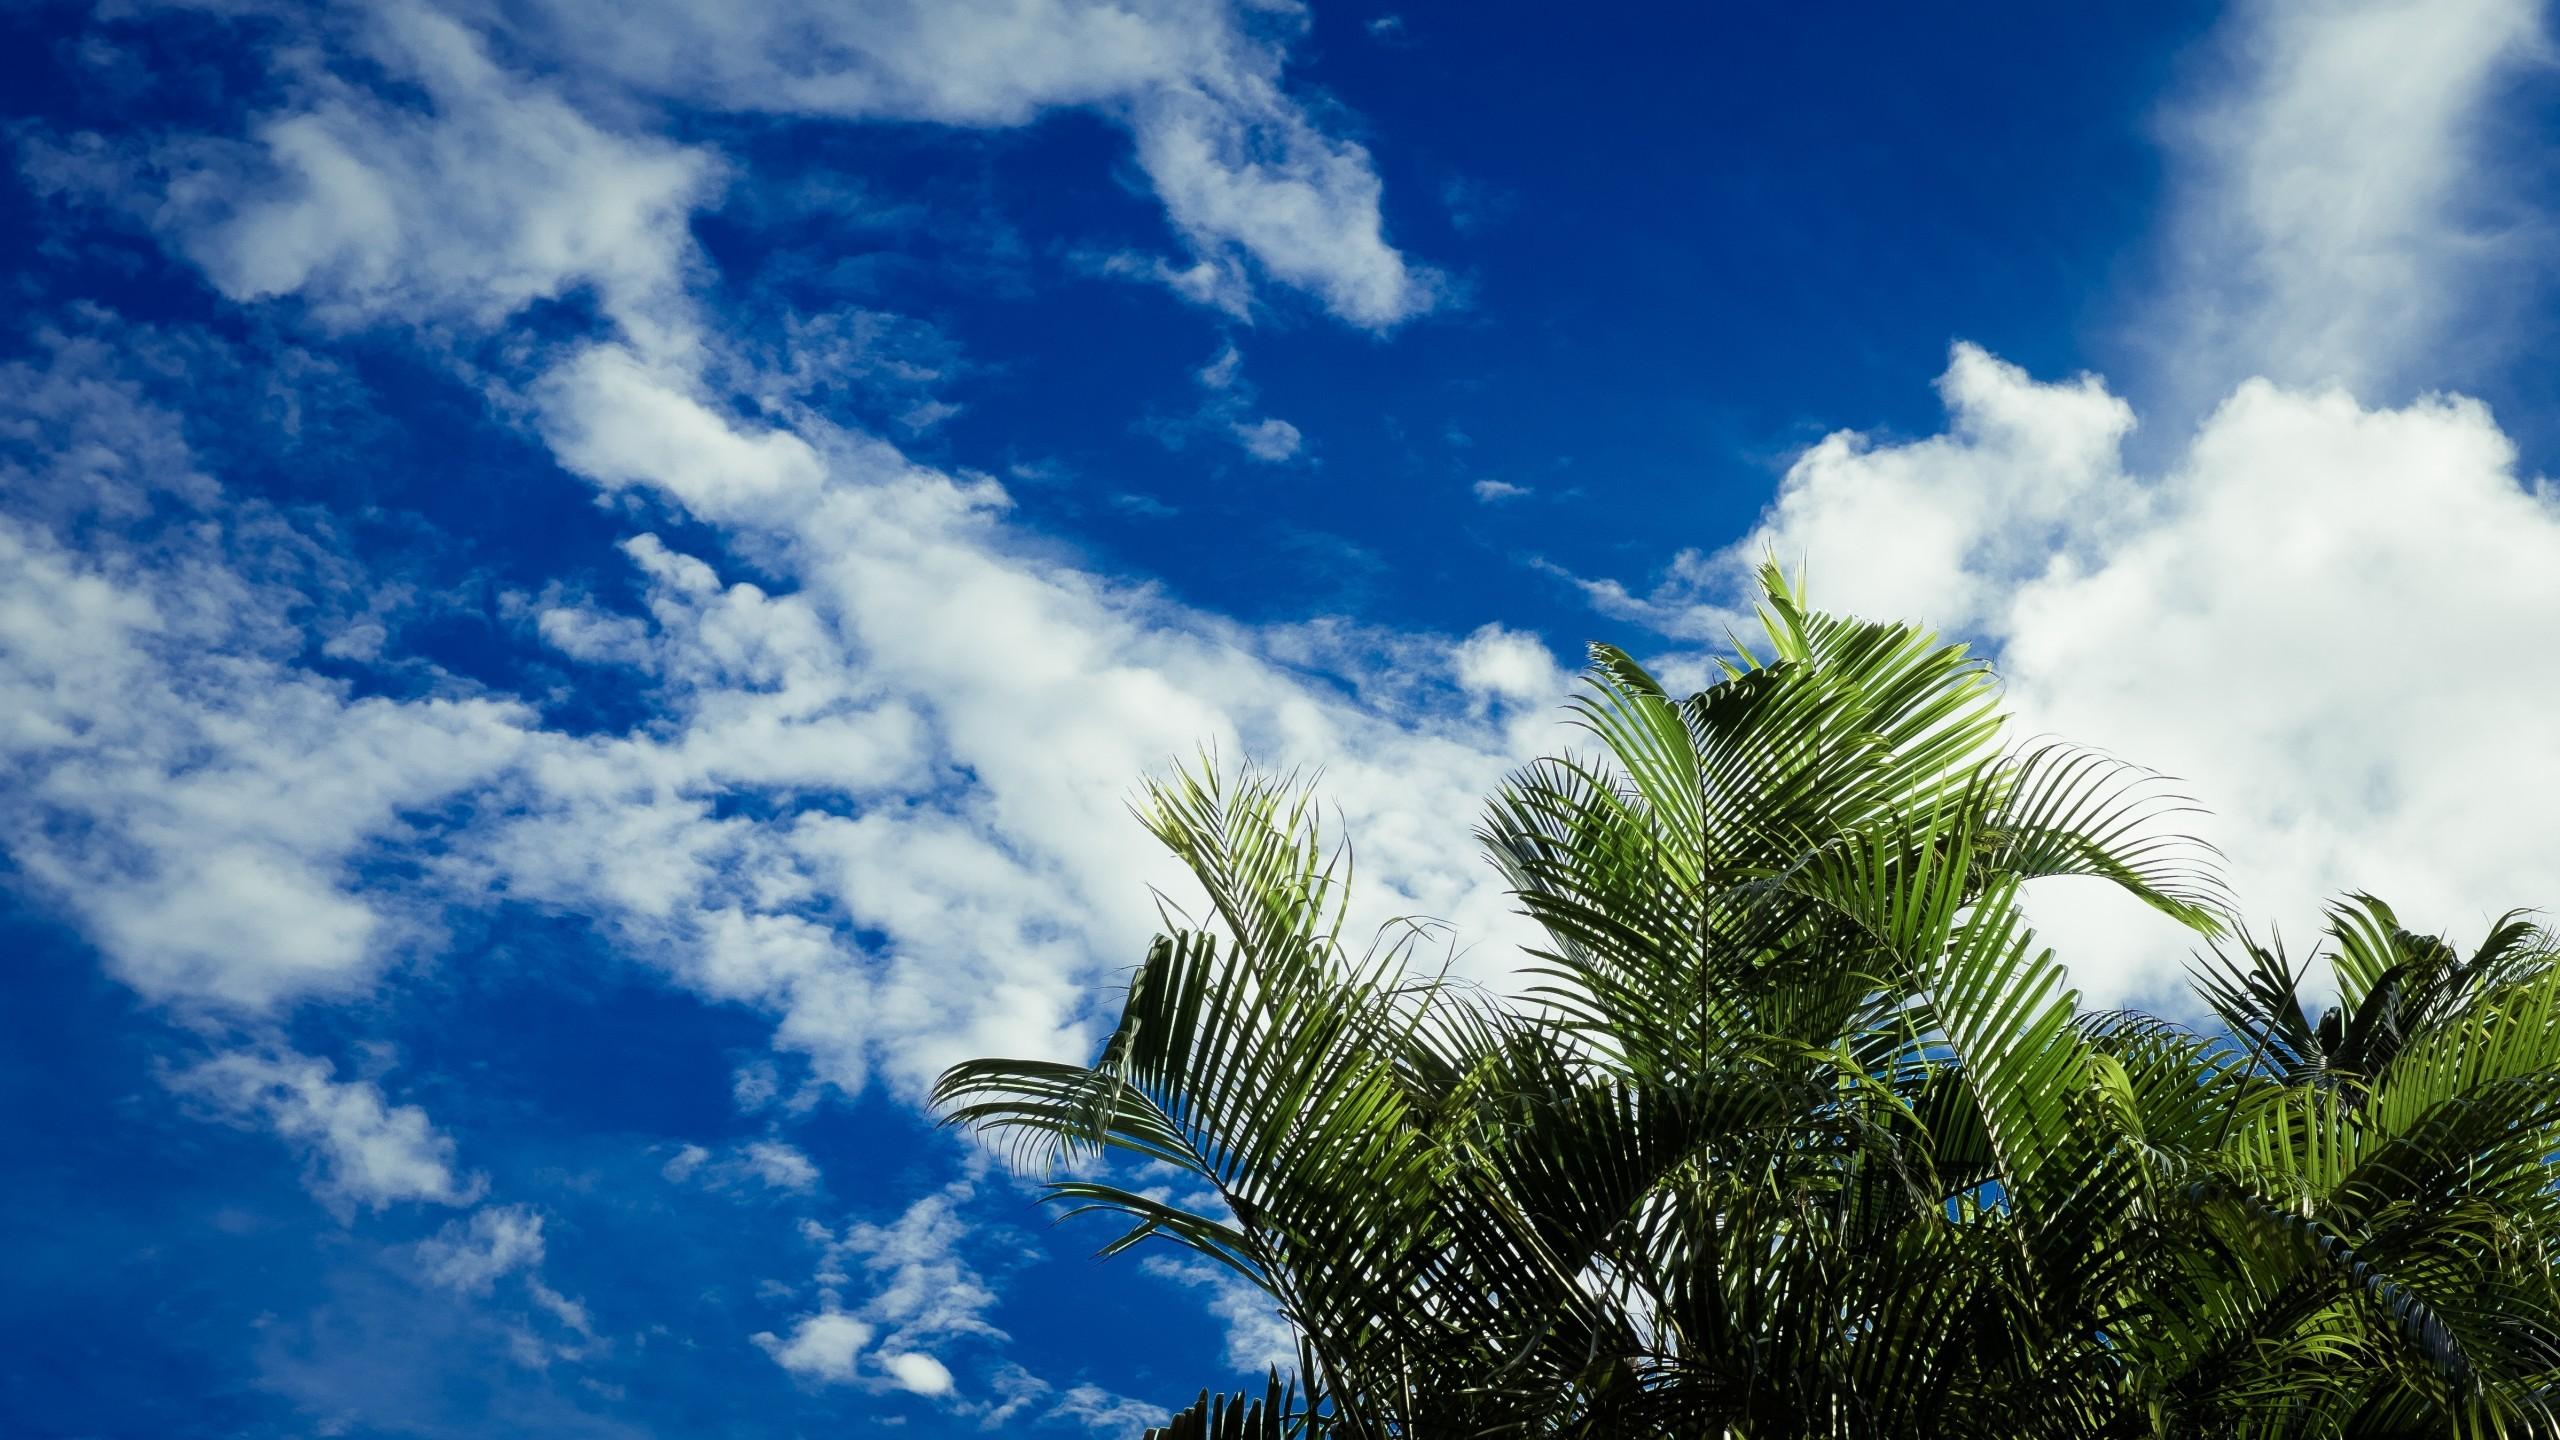 Download 2560x1440 Palm Trees, Clouds, Tropical Island